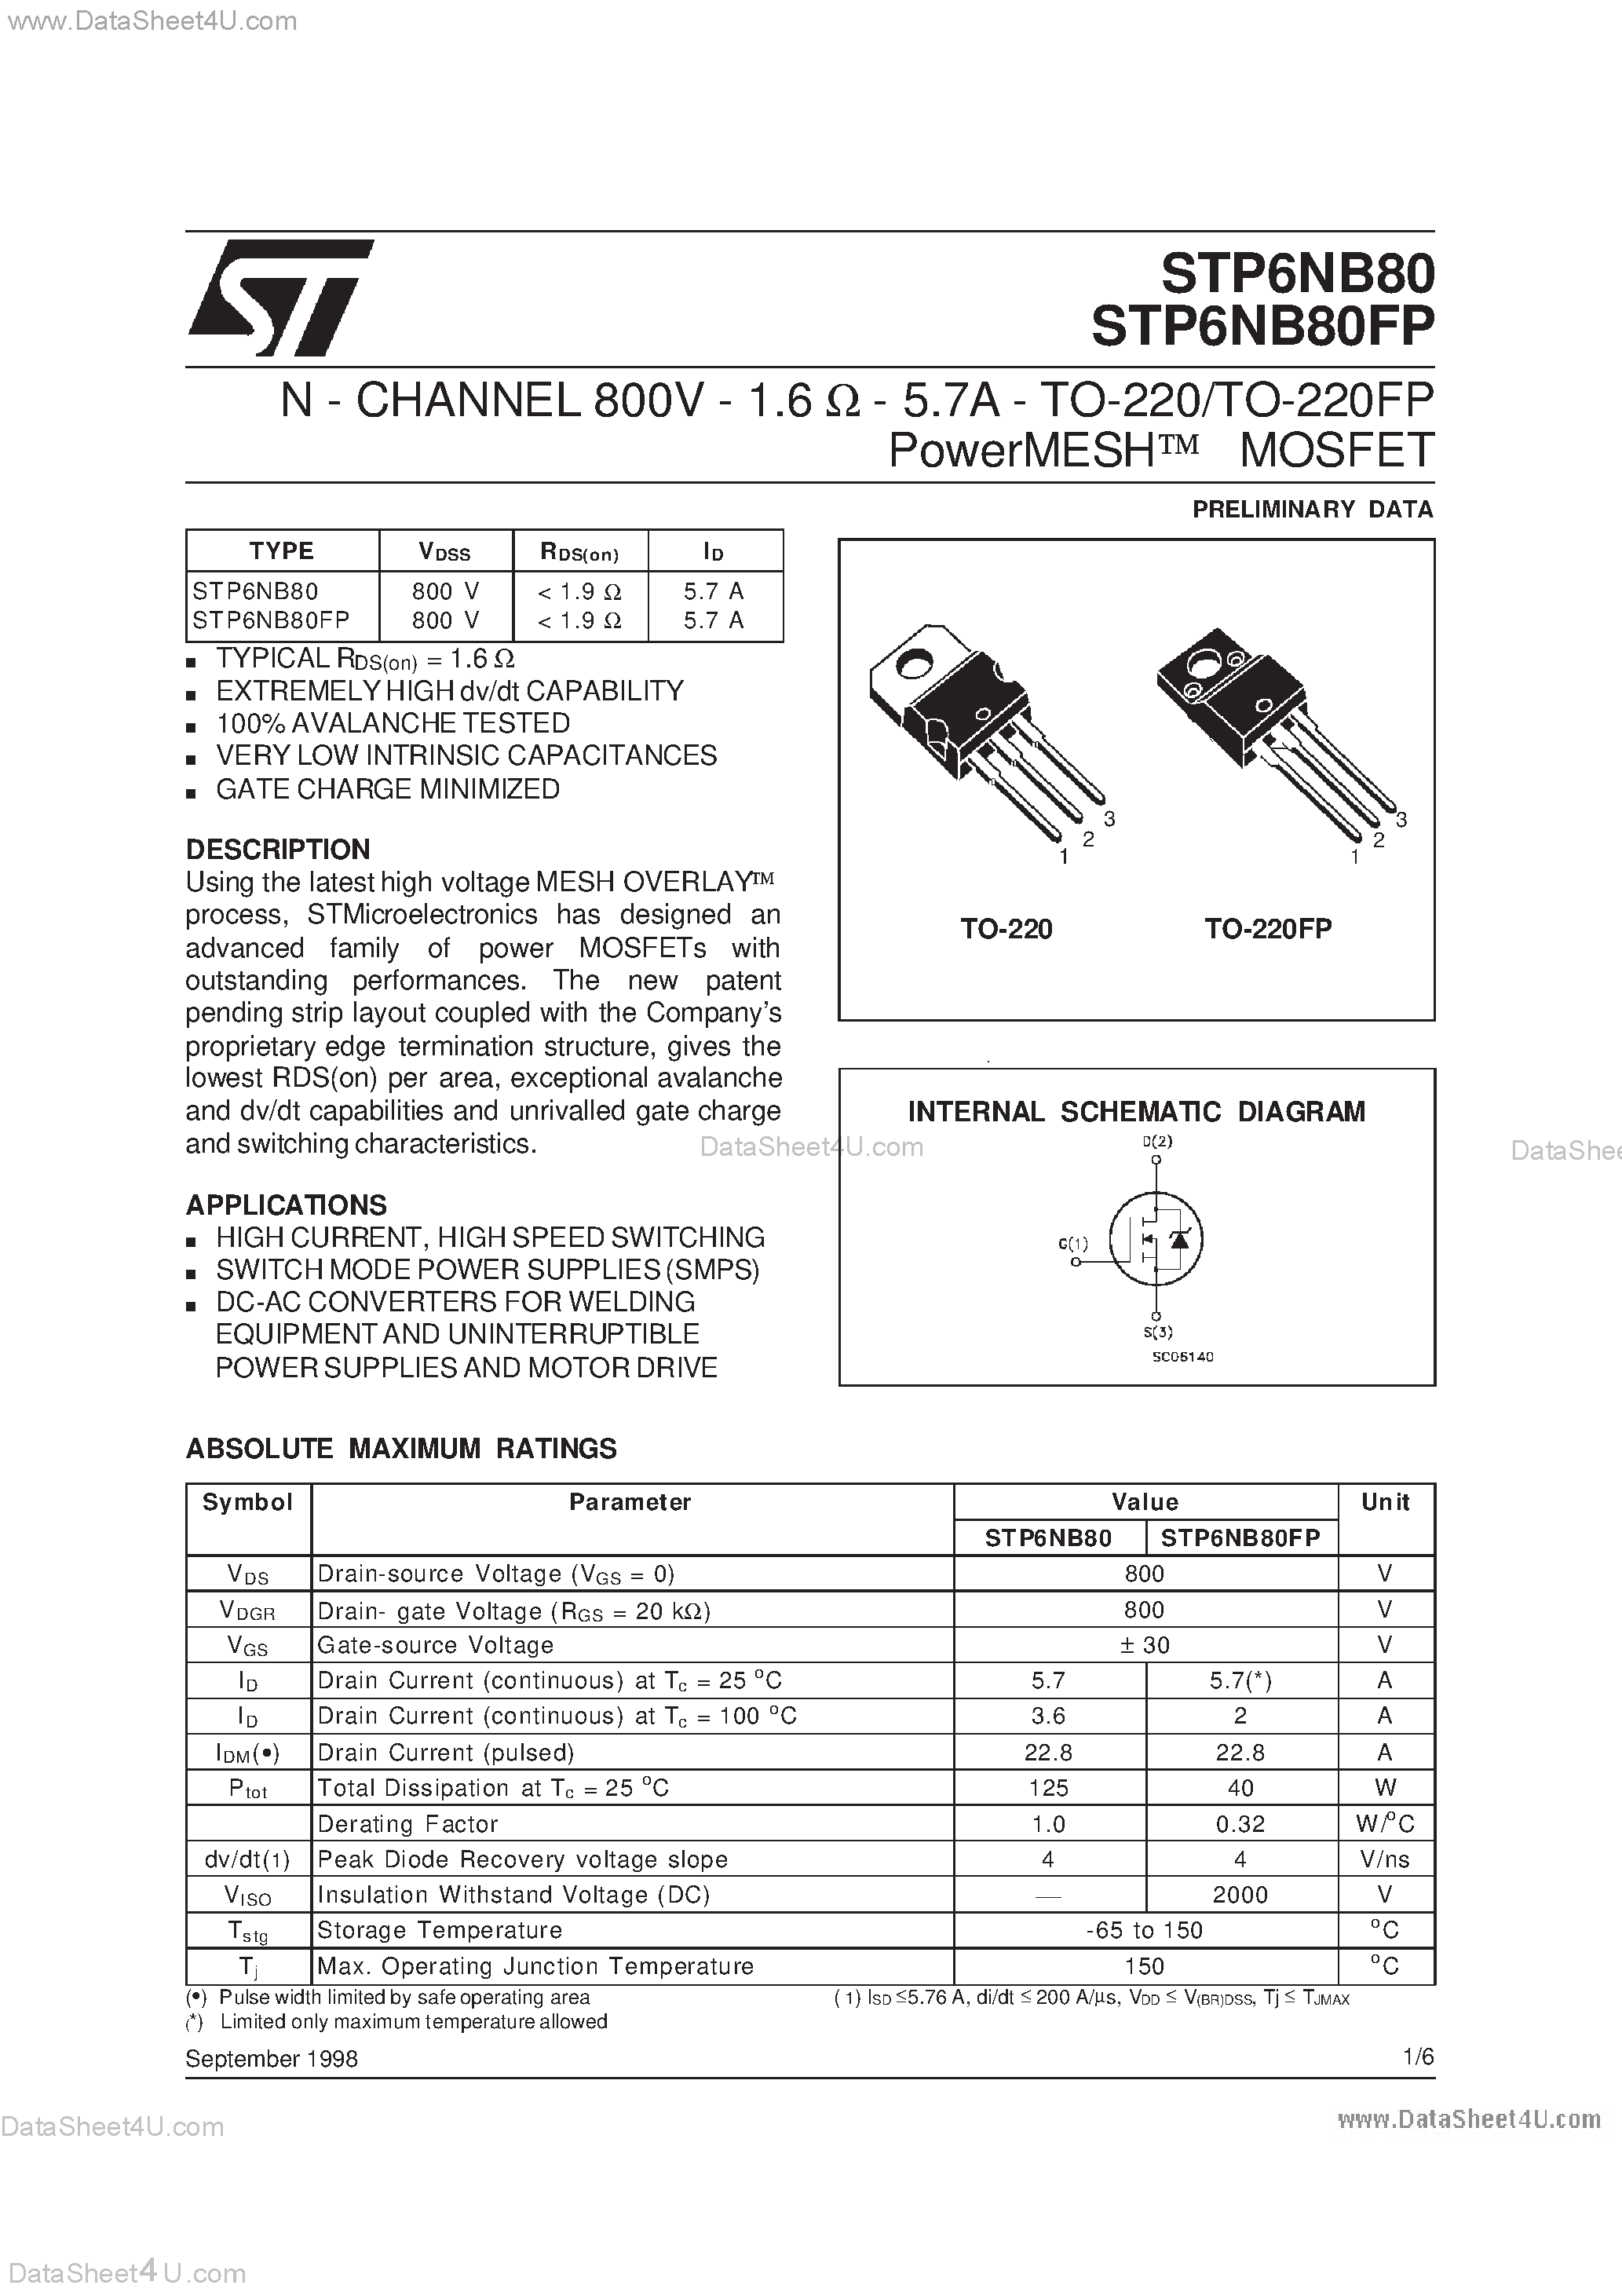 Datasheet STP6NB80 - N - CHANNEL 800V - 1.6 Ohm - 5.7A - TO-220/TO-220FP page 1